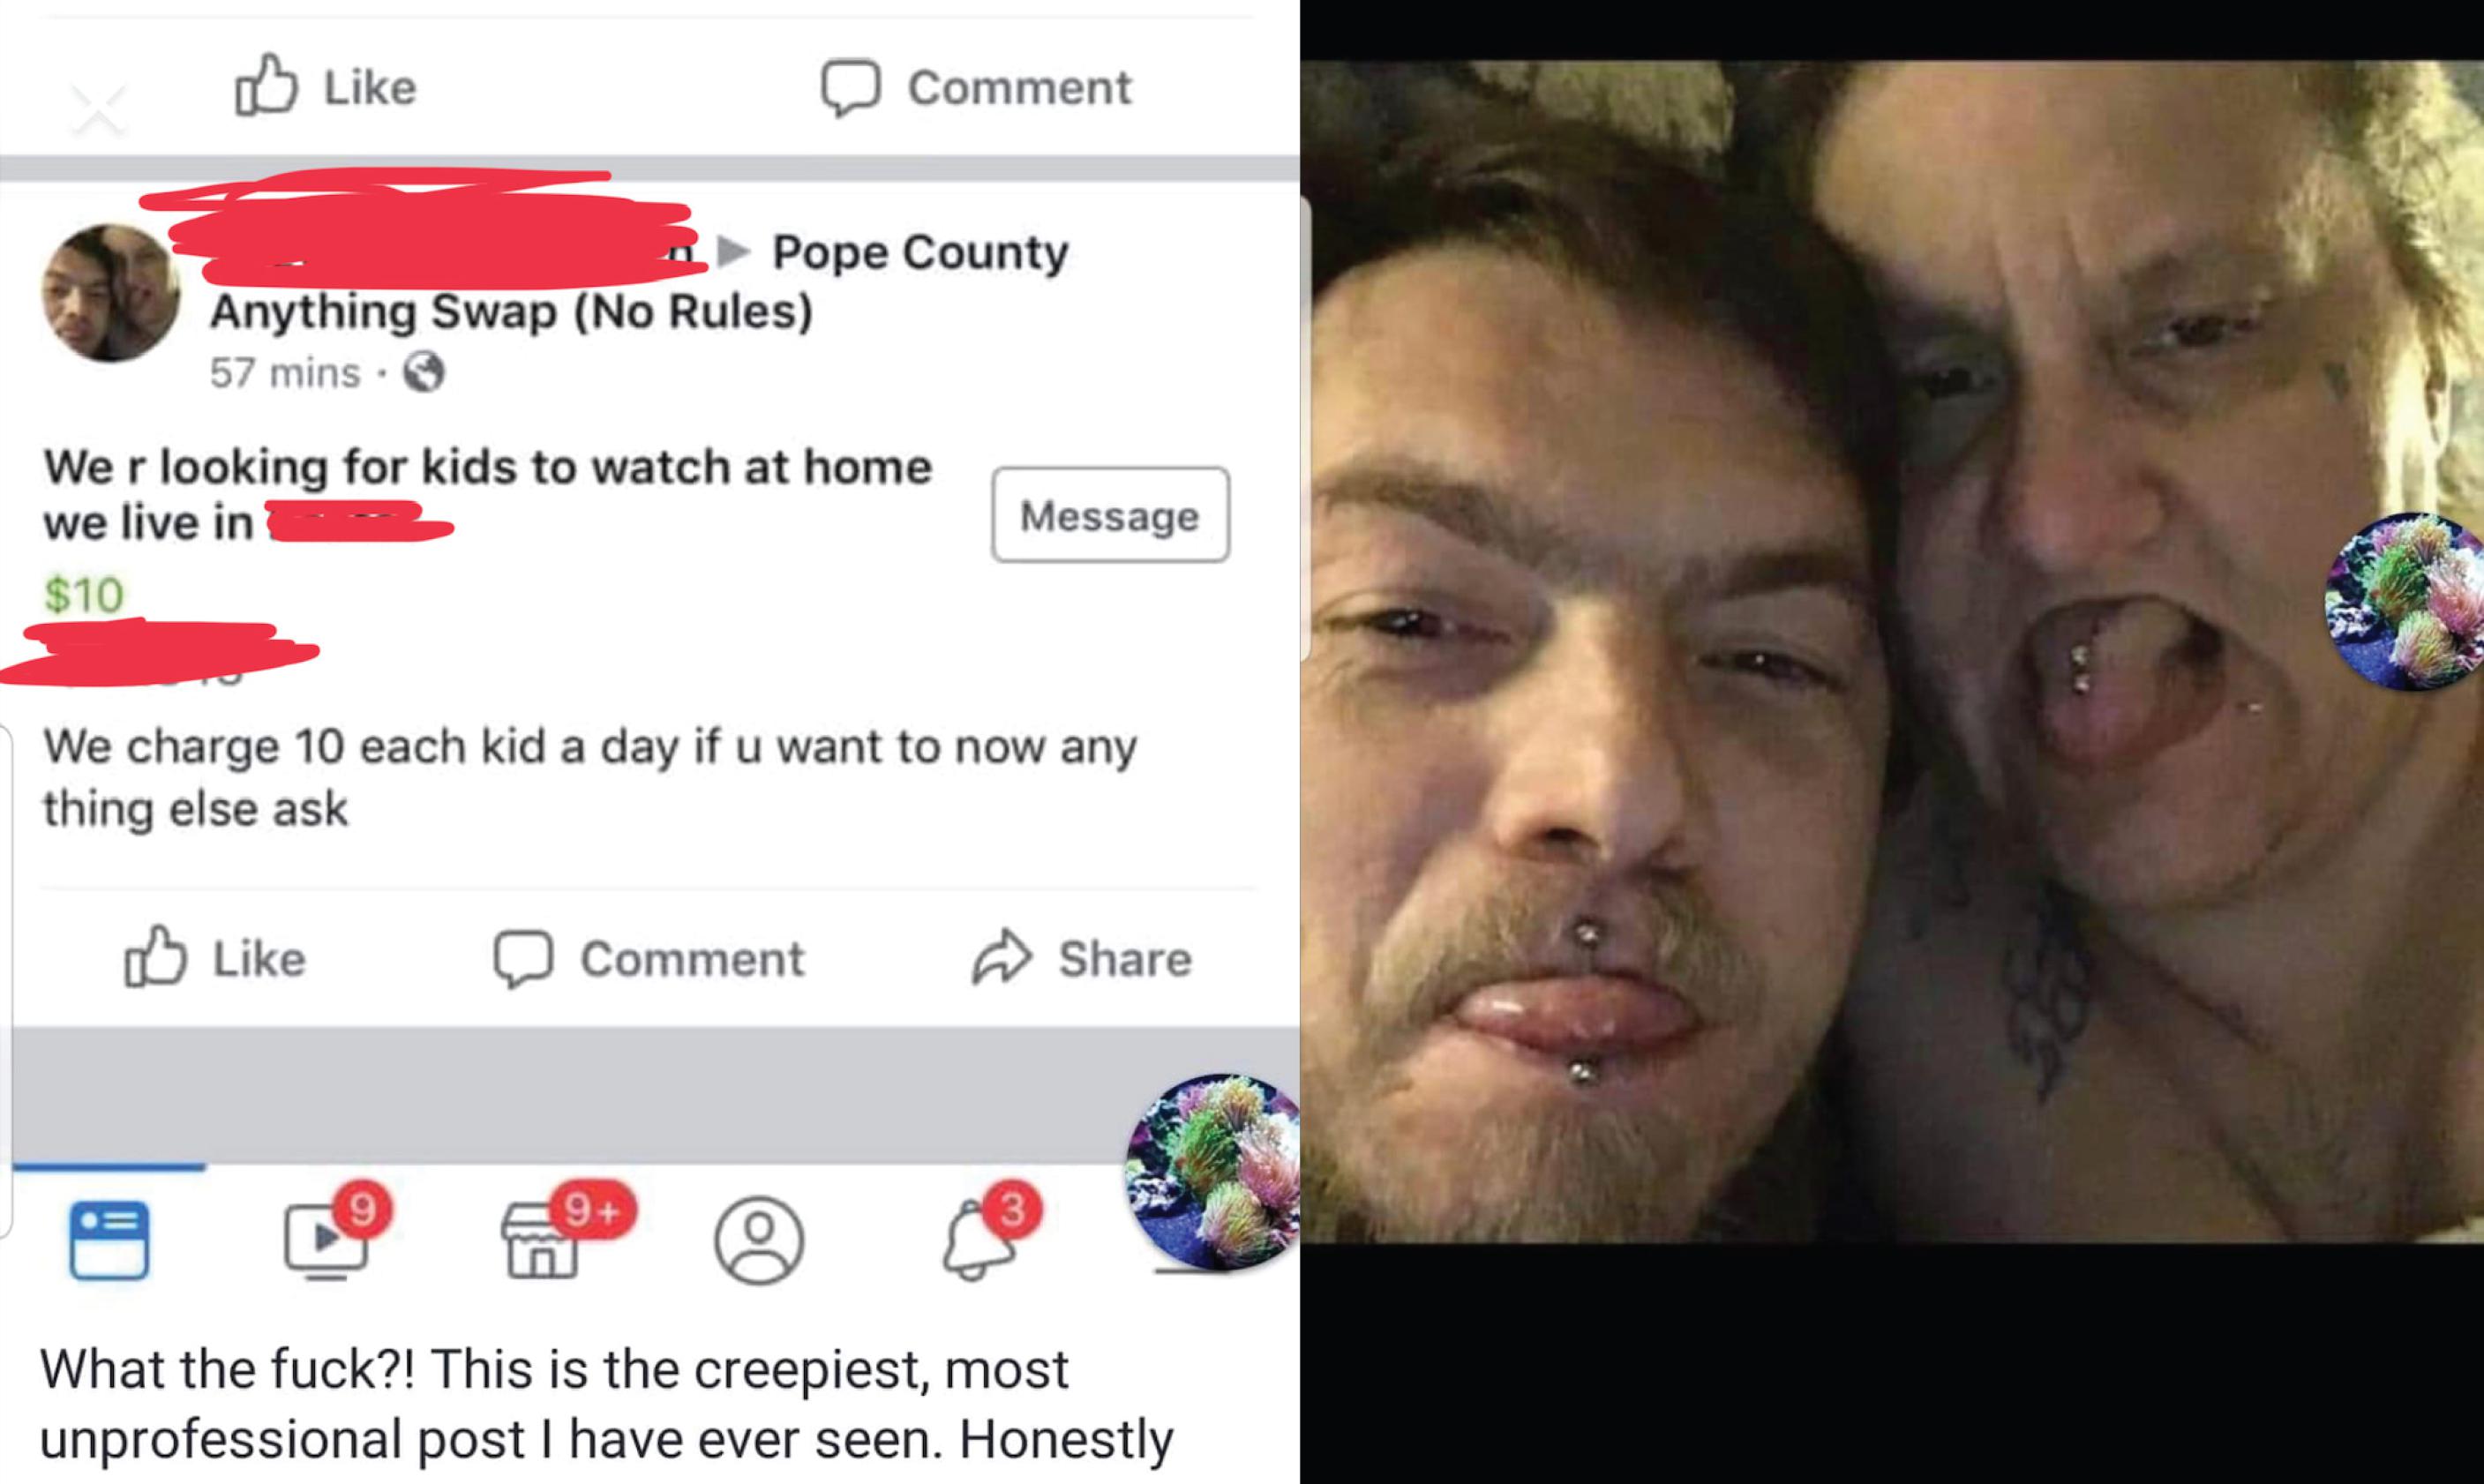 facial expression - Comment Pope County Anything Swap No Rules 57 mins. Wer looking for kids to watch at home we live in $10 Message We charge 10 each kid a day if u want to now any thing else ask Comment What the fuck?! This is the creepiest, most unprof